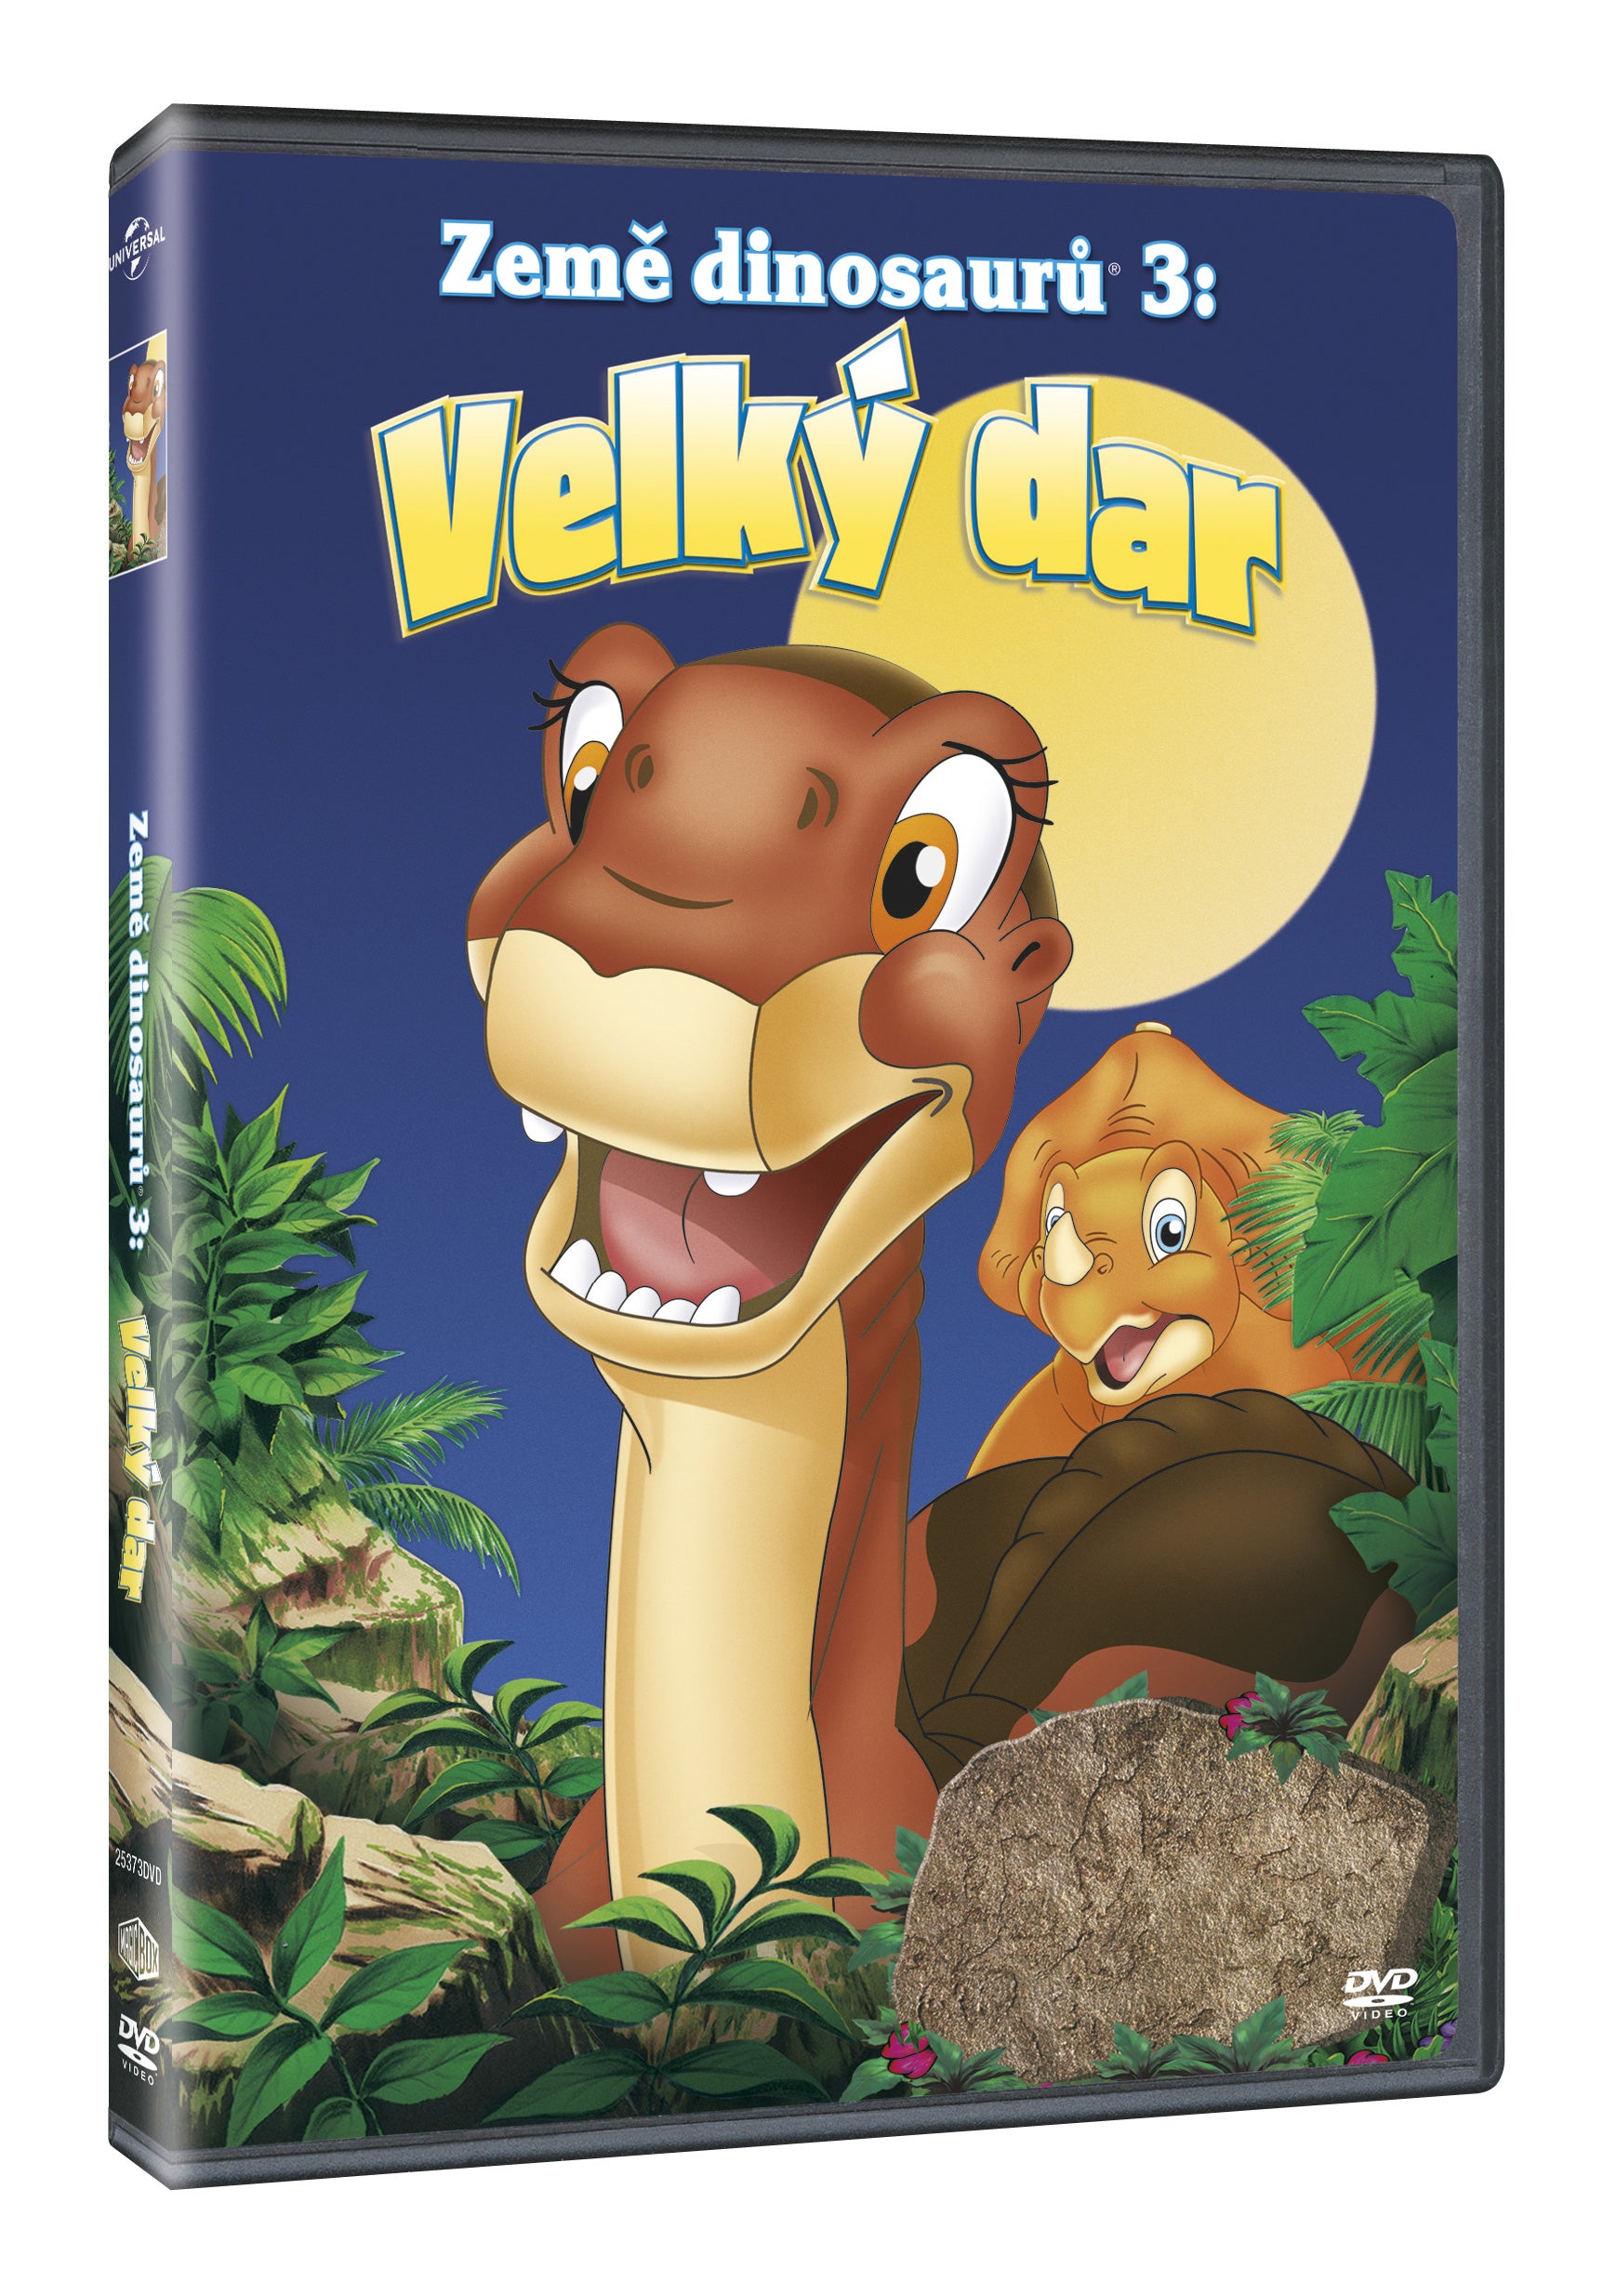 Zeme dinosauru 3: Velky dar DVD / The Land Before Time III: The Time of the Great Giving